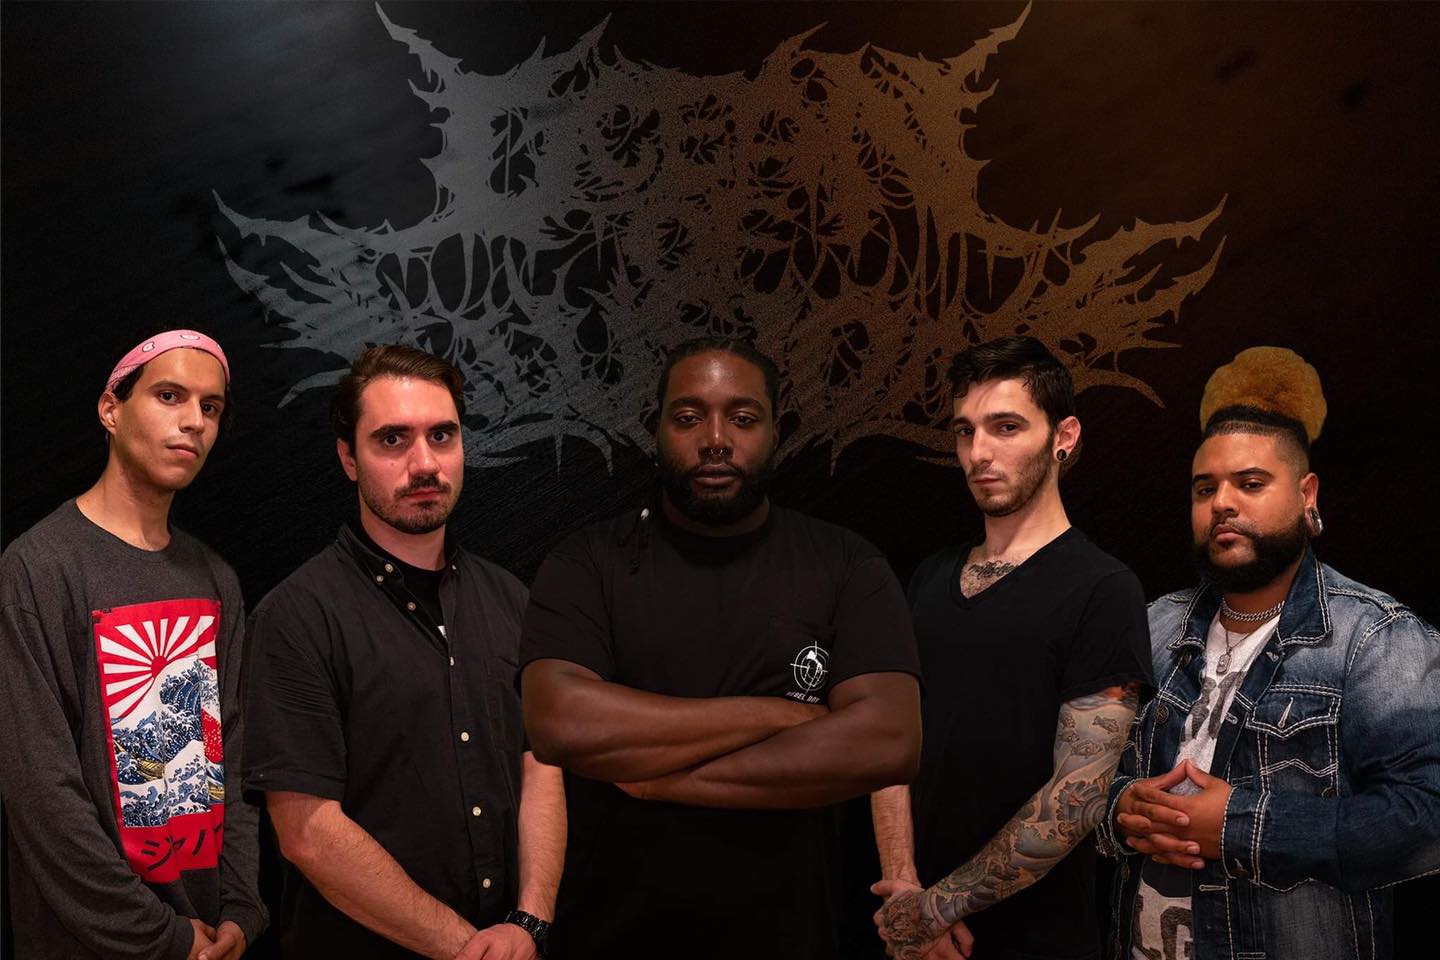 Bandcamp Roulette: Punishingly heavy deathcore from Ocean of Illusions